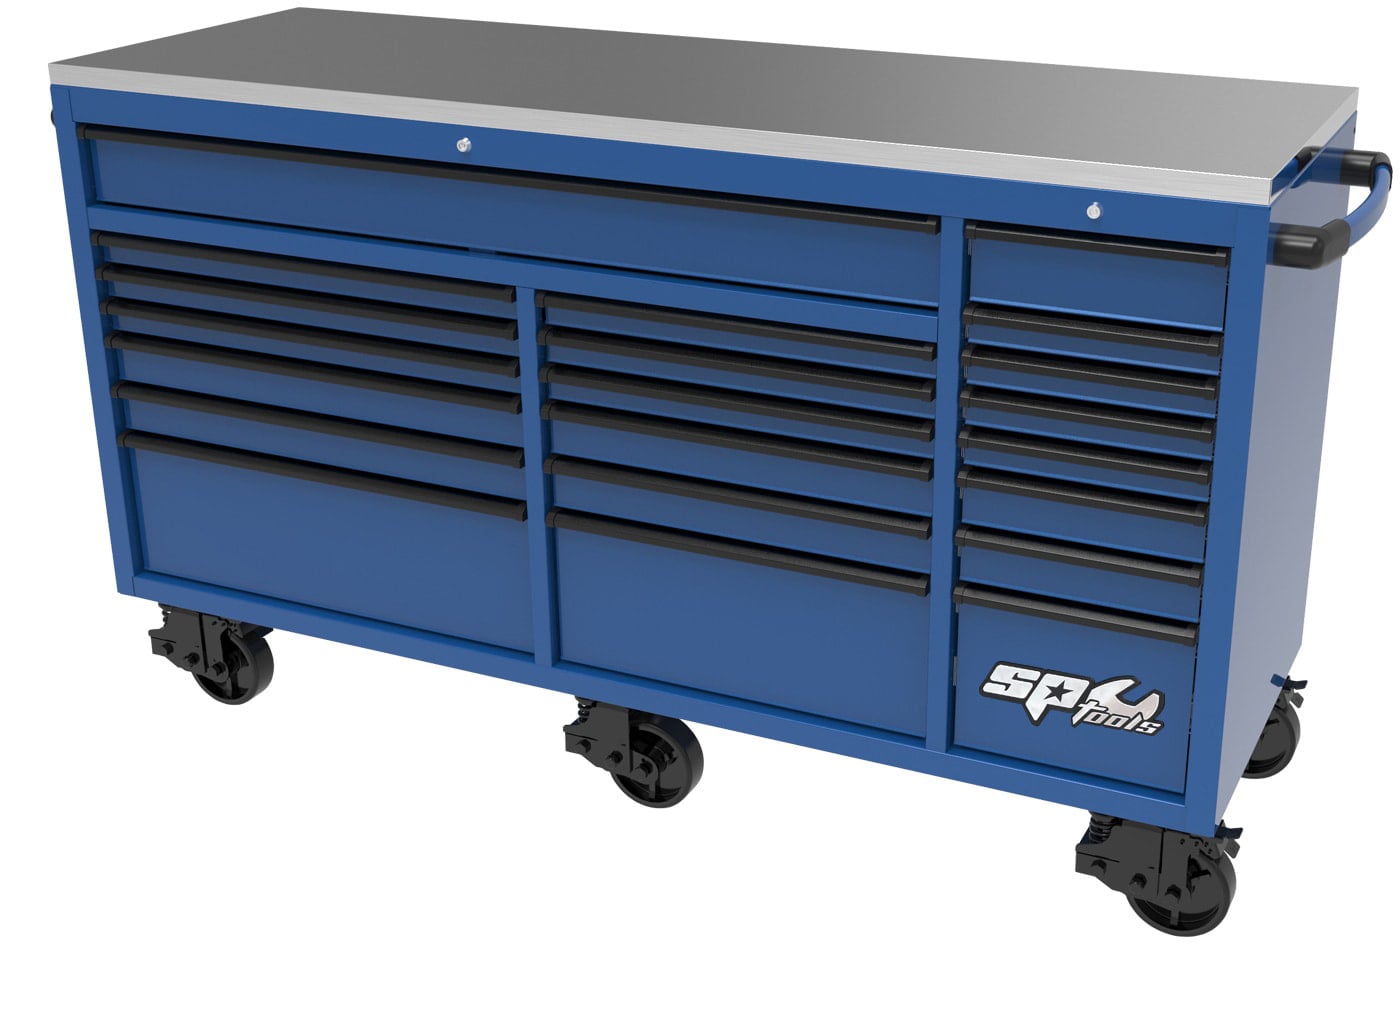 73" USA SUMO Series Wide Roller Cabinet, 21 Drawer by SP Tools